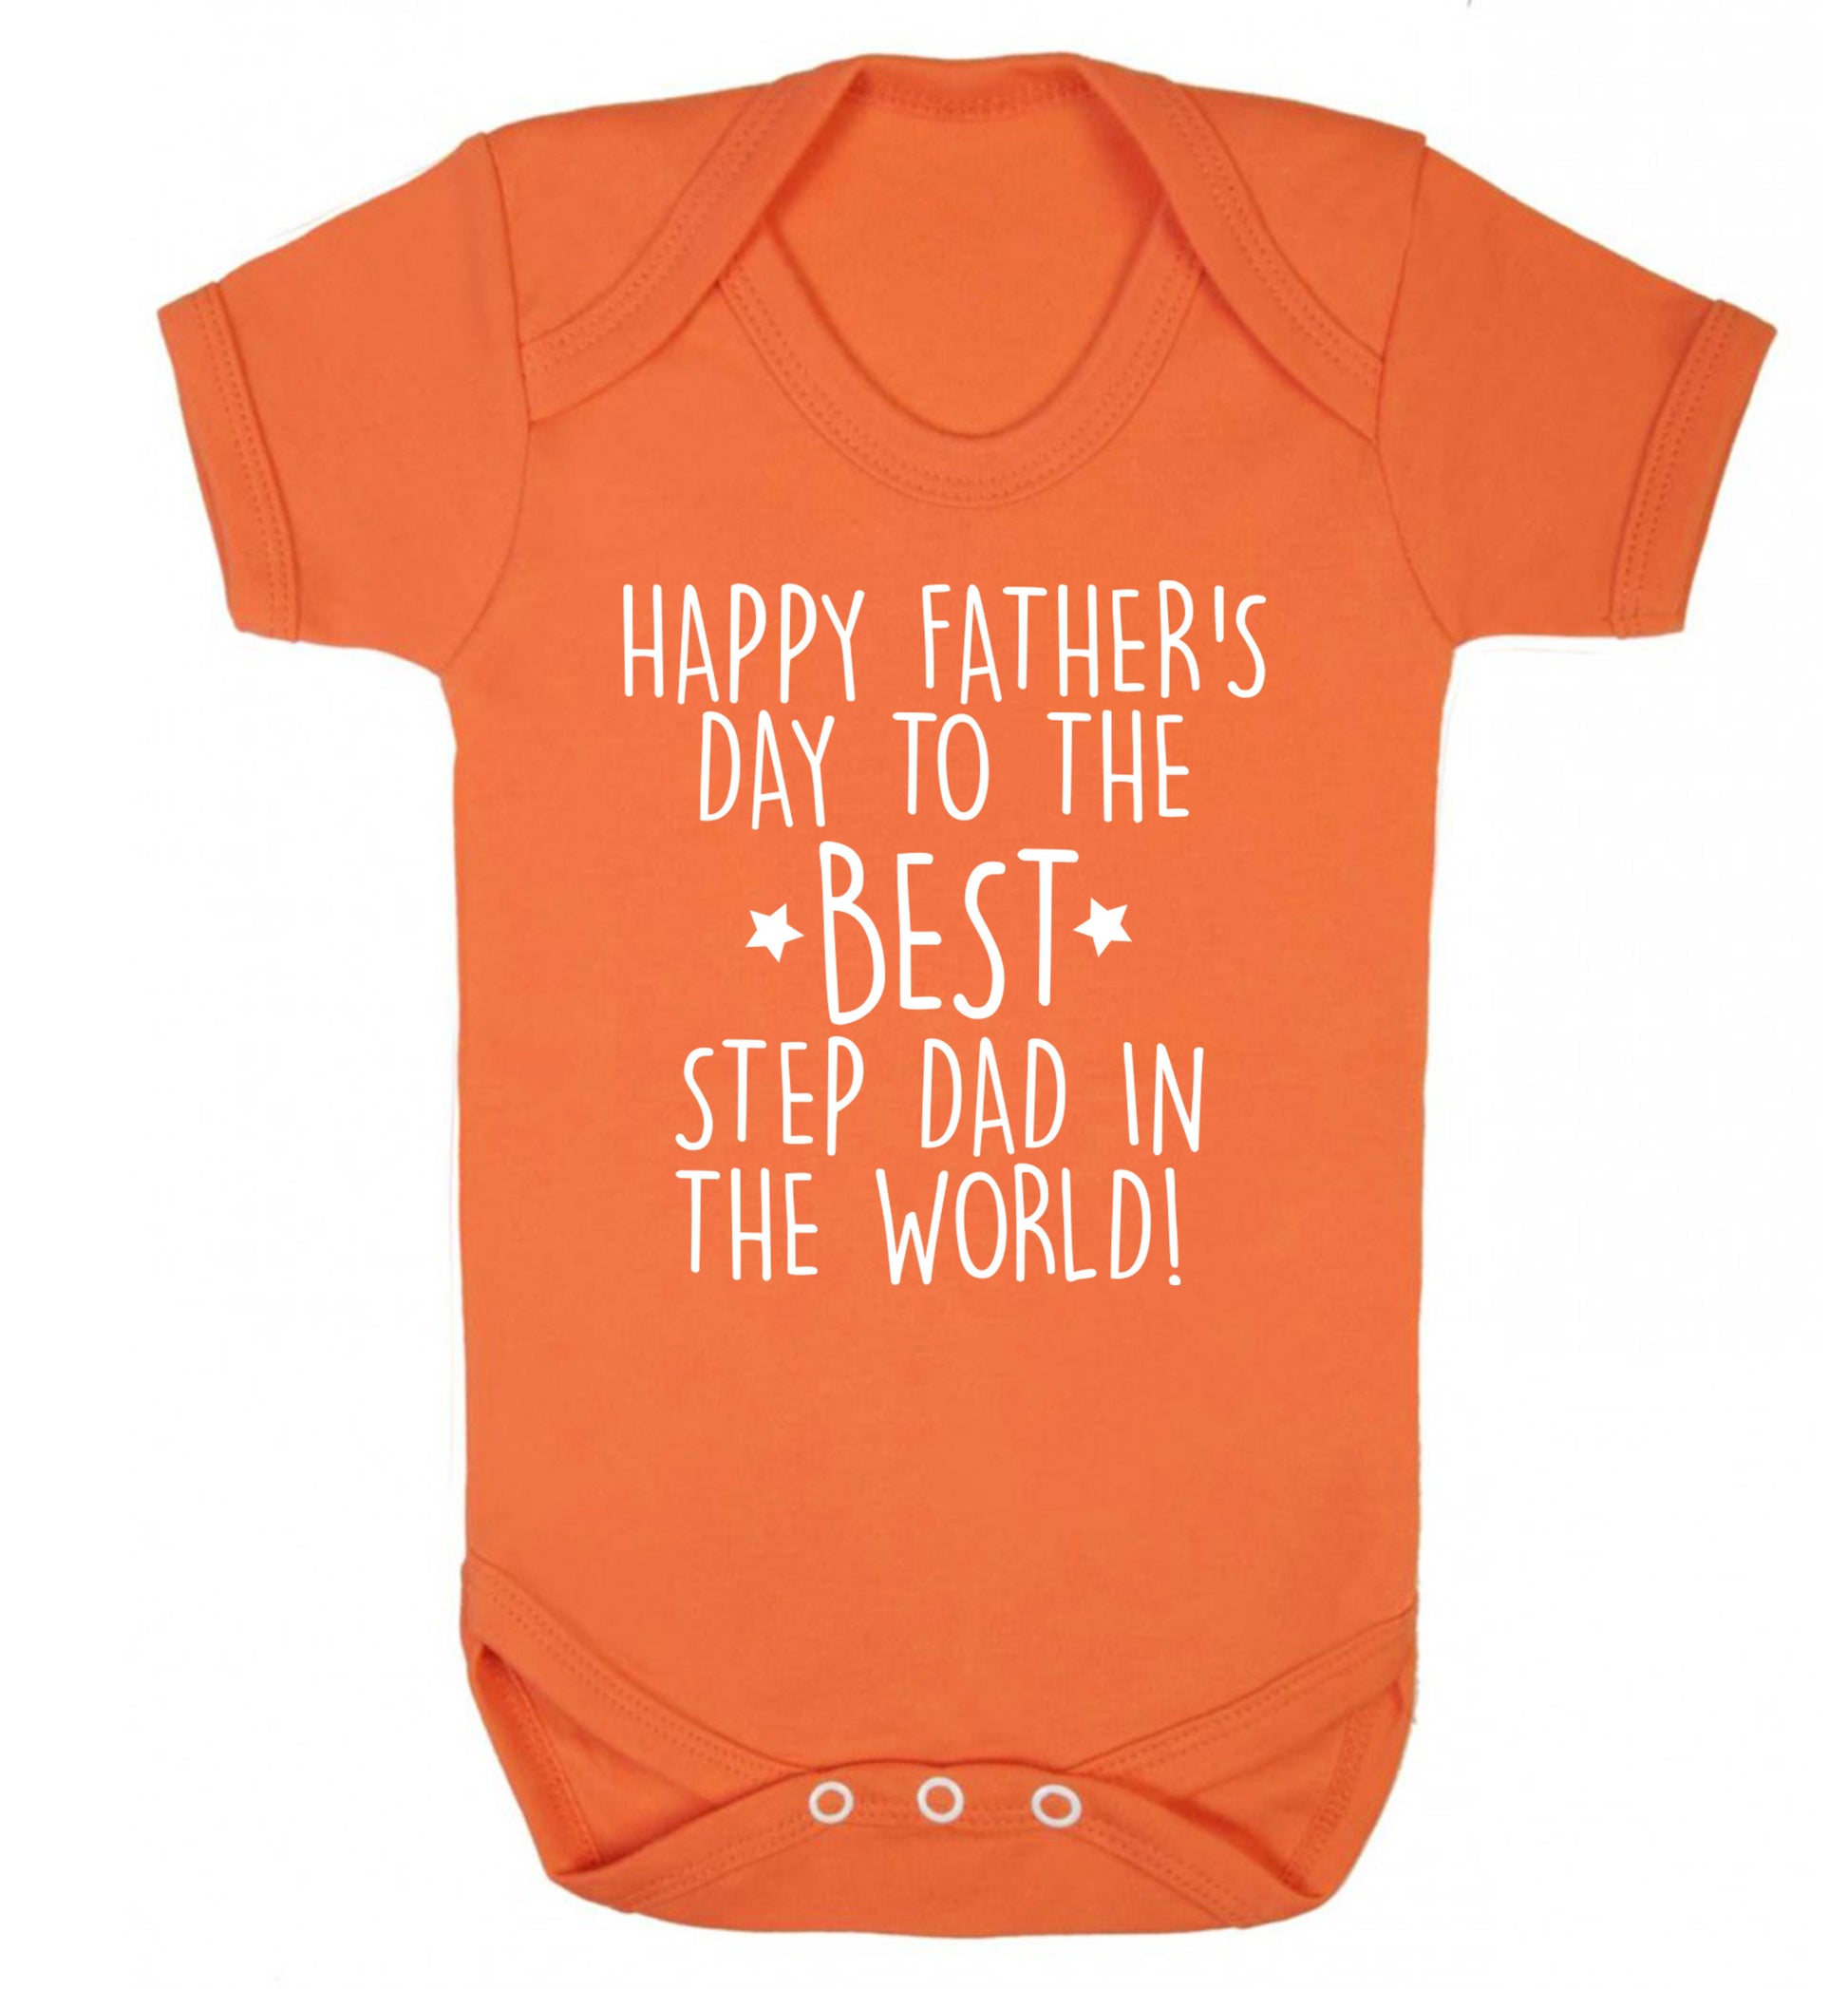 Happy Father's day to the best step dad in the world! Baby Vest orange 18-24 months